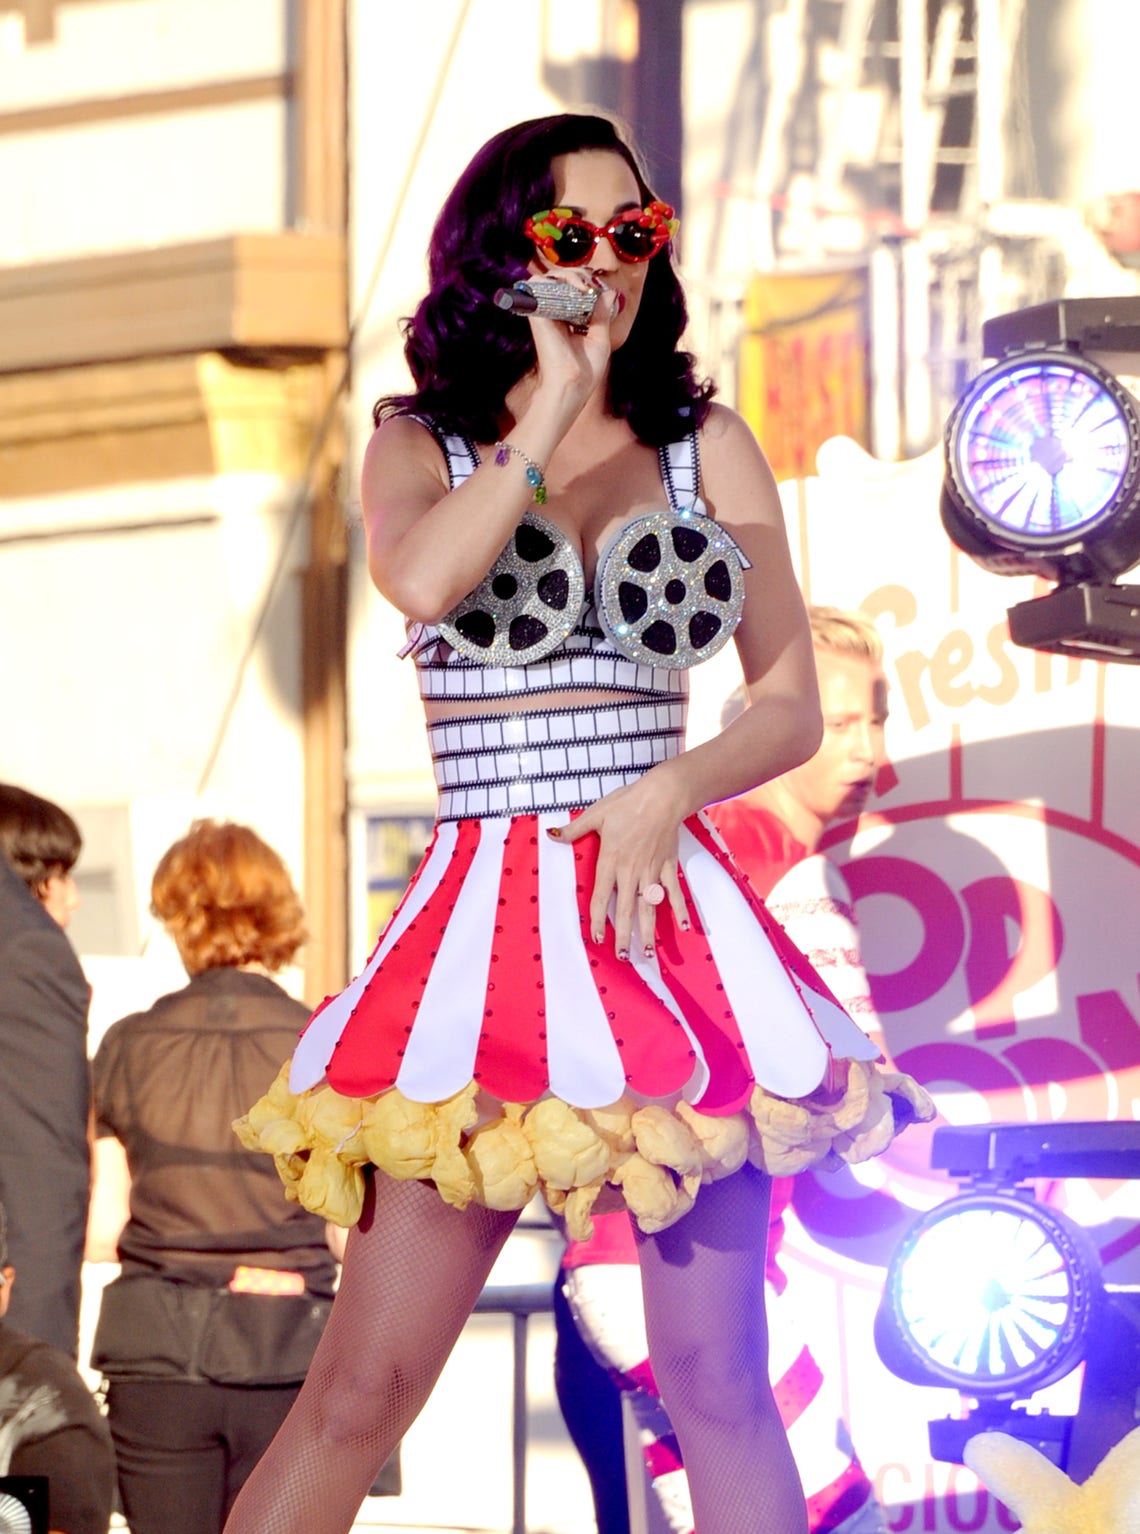 47 of Katy Perry's Most Outrageous Looks Since 2008